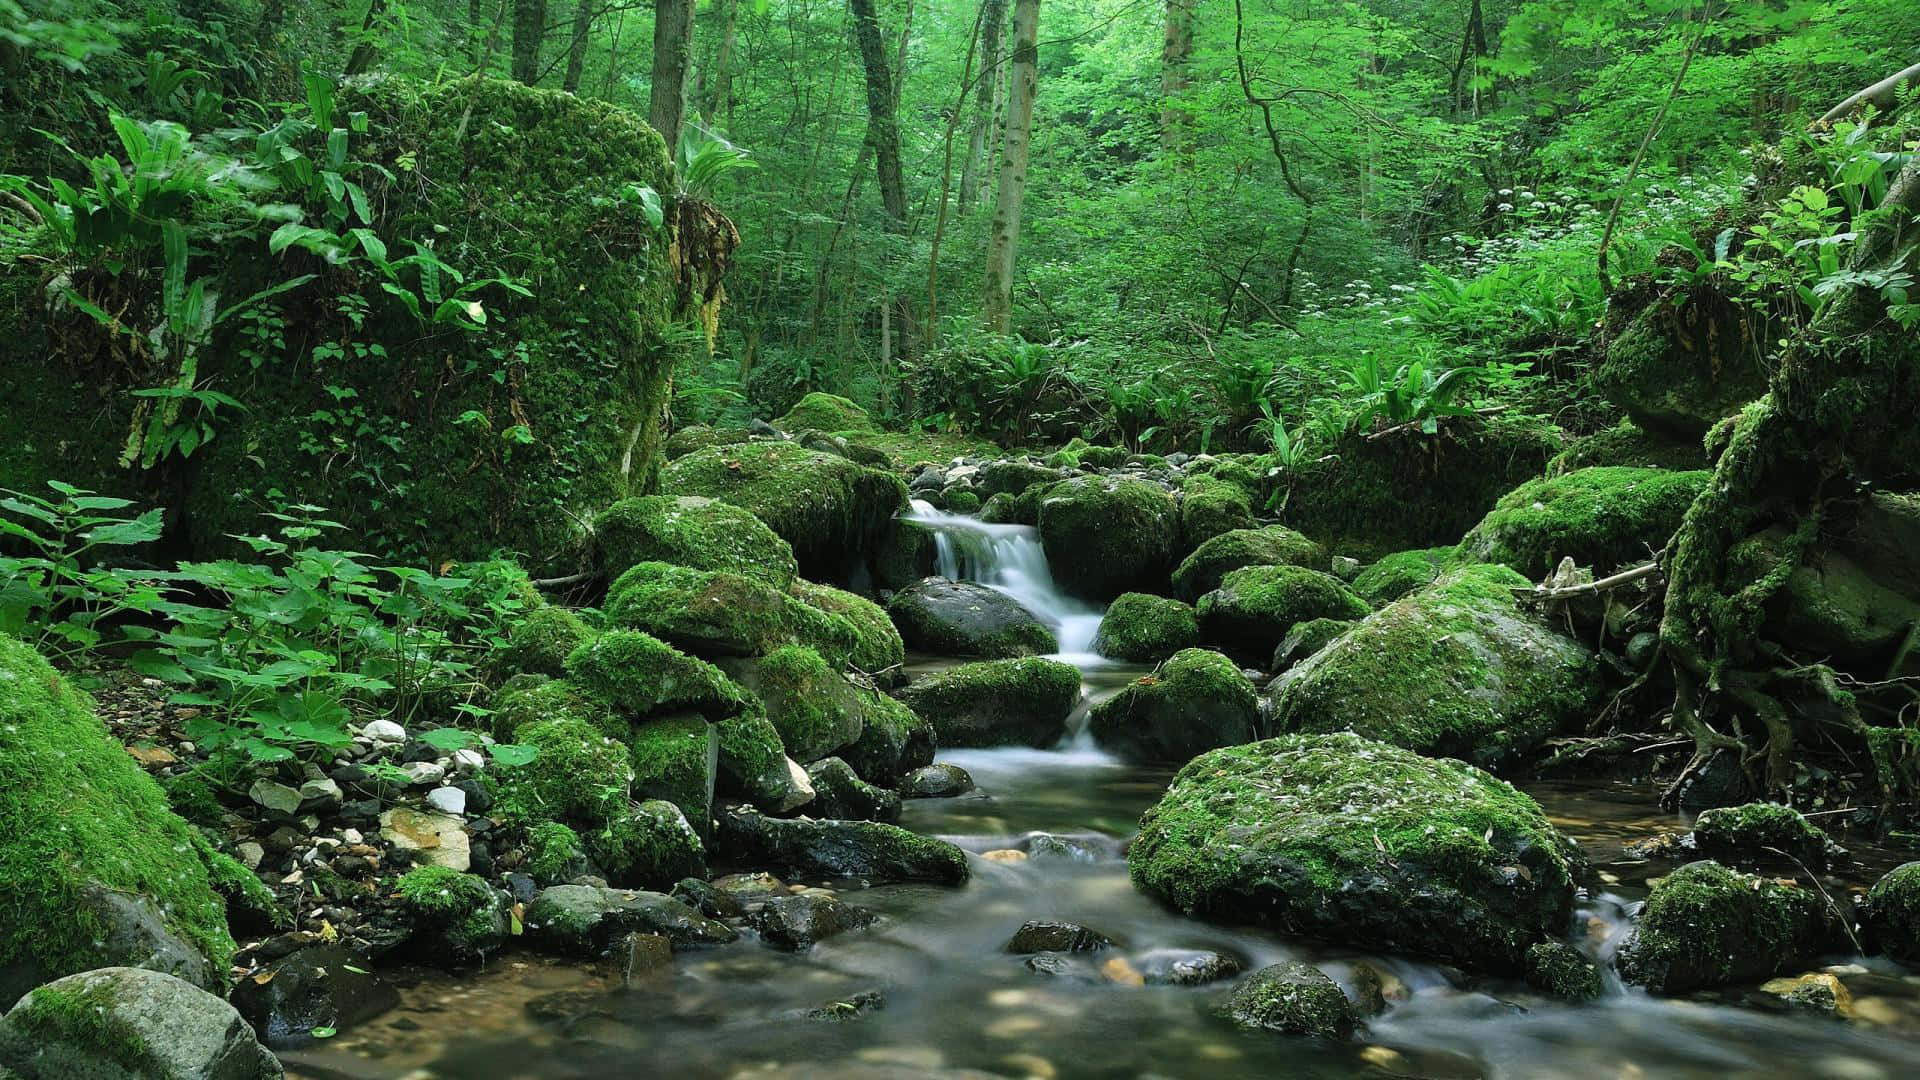 Enjoy a picturesque view of a creek in nature.